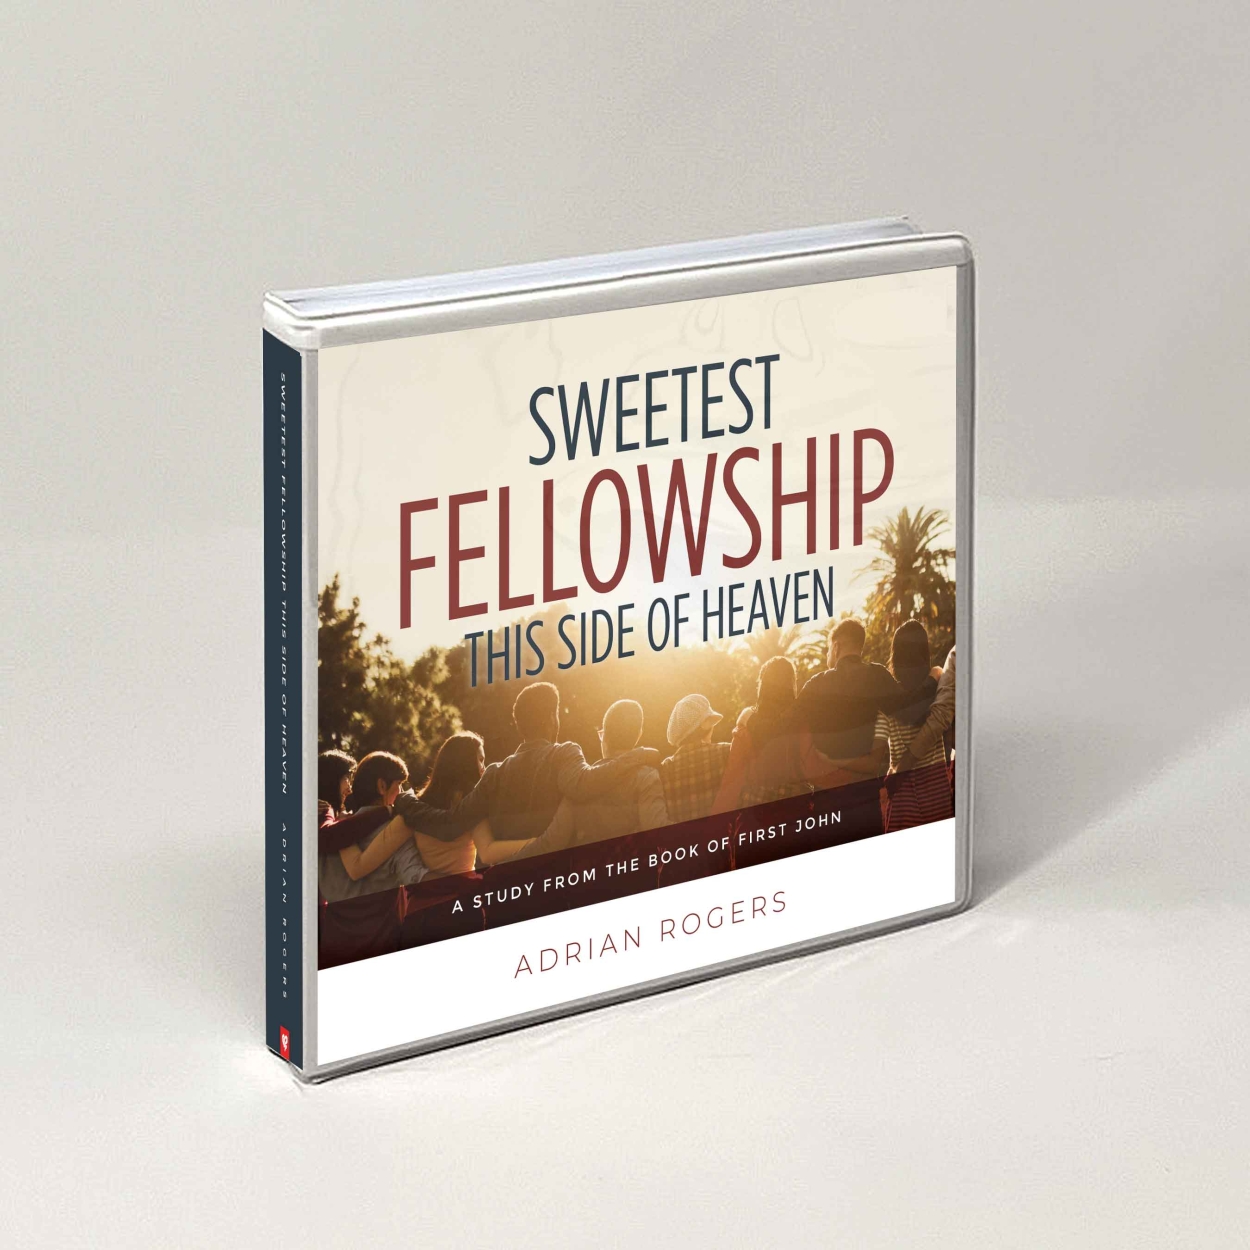 Cda160Lg The Sweetest Fellowship this Side of Heaven Series